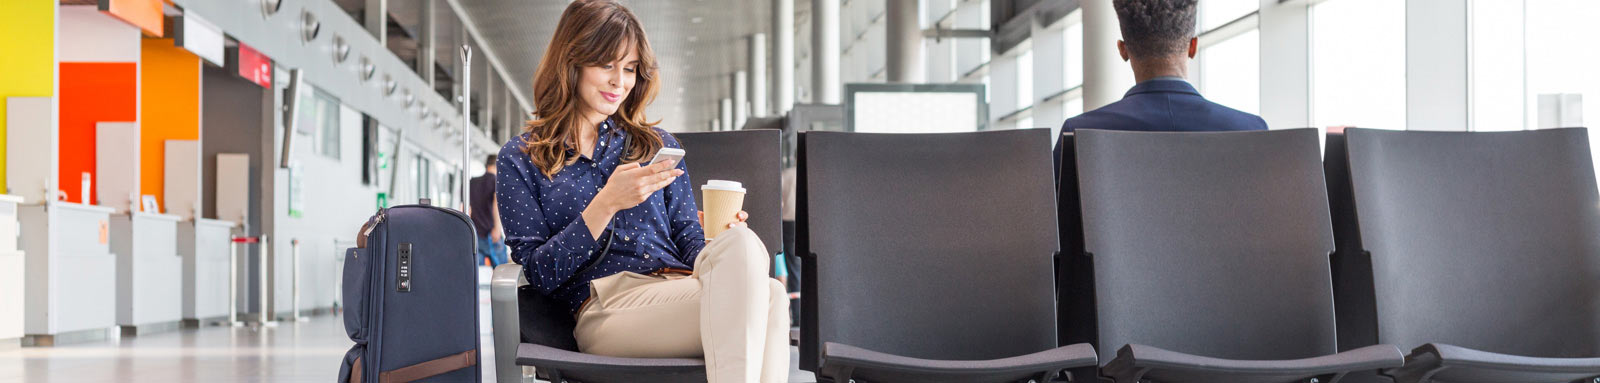 Woman holding a mobile phone at an airport lounge